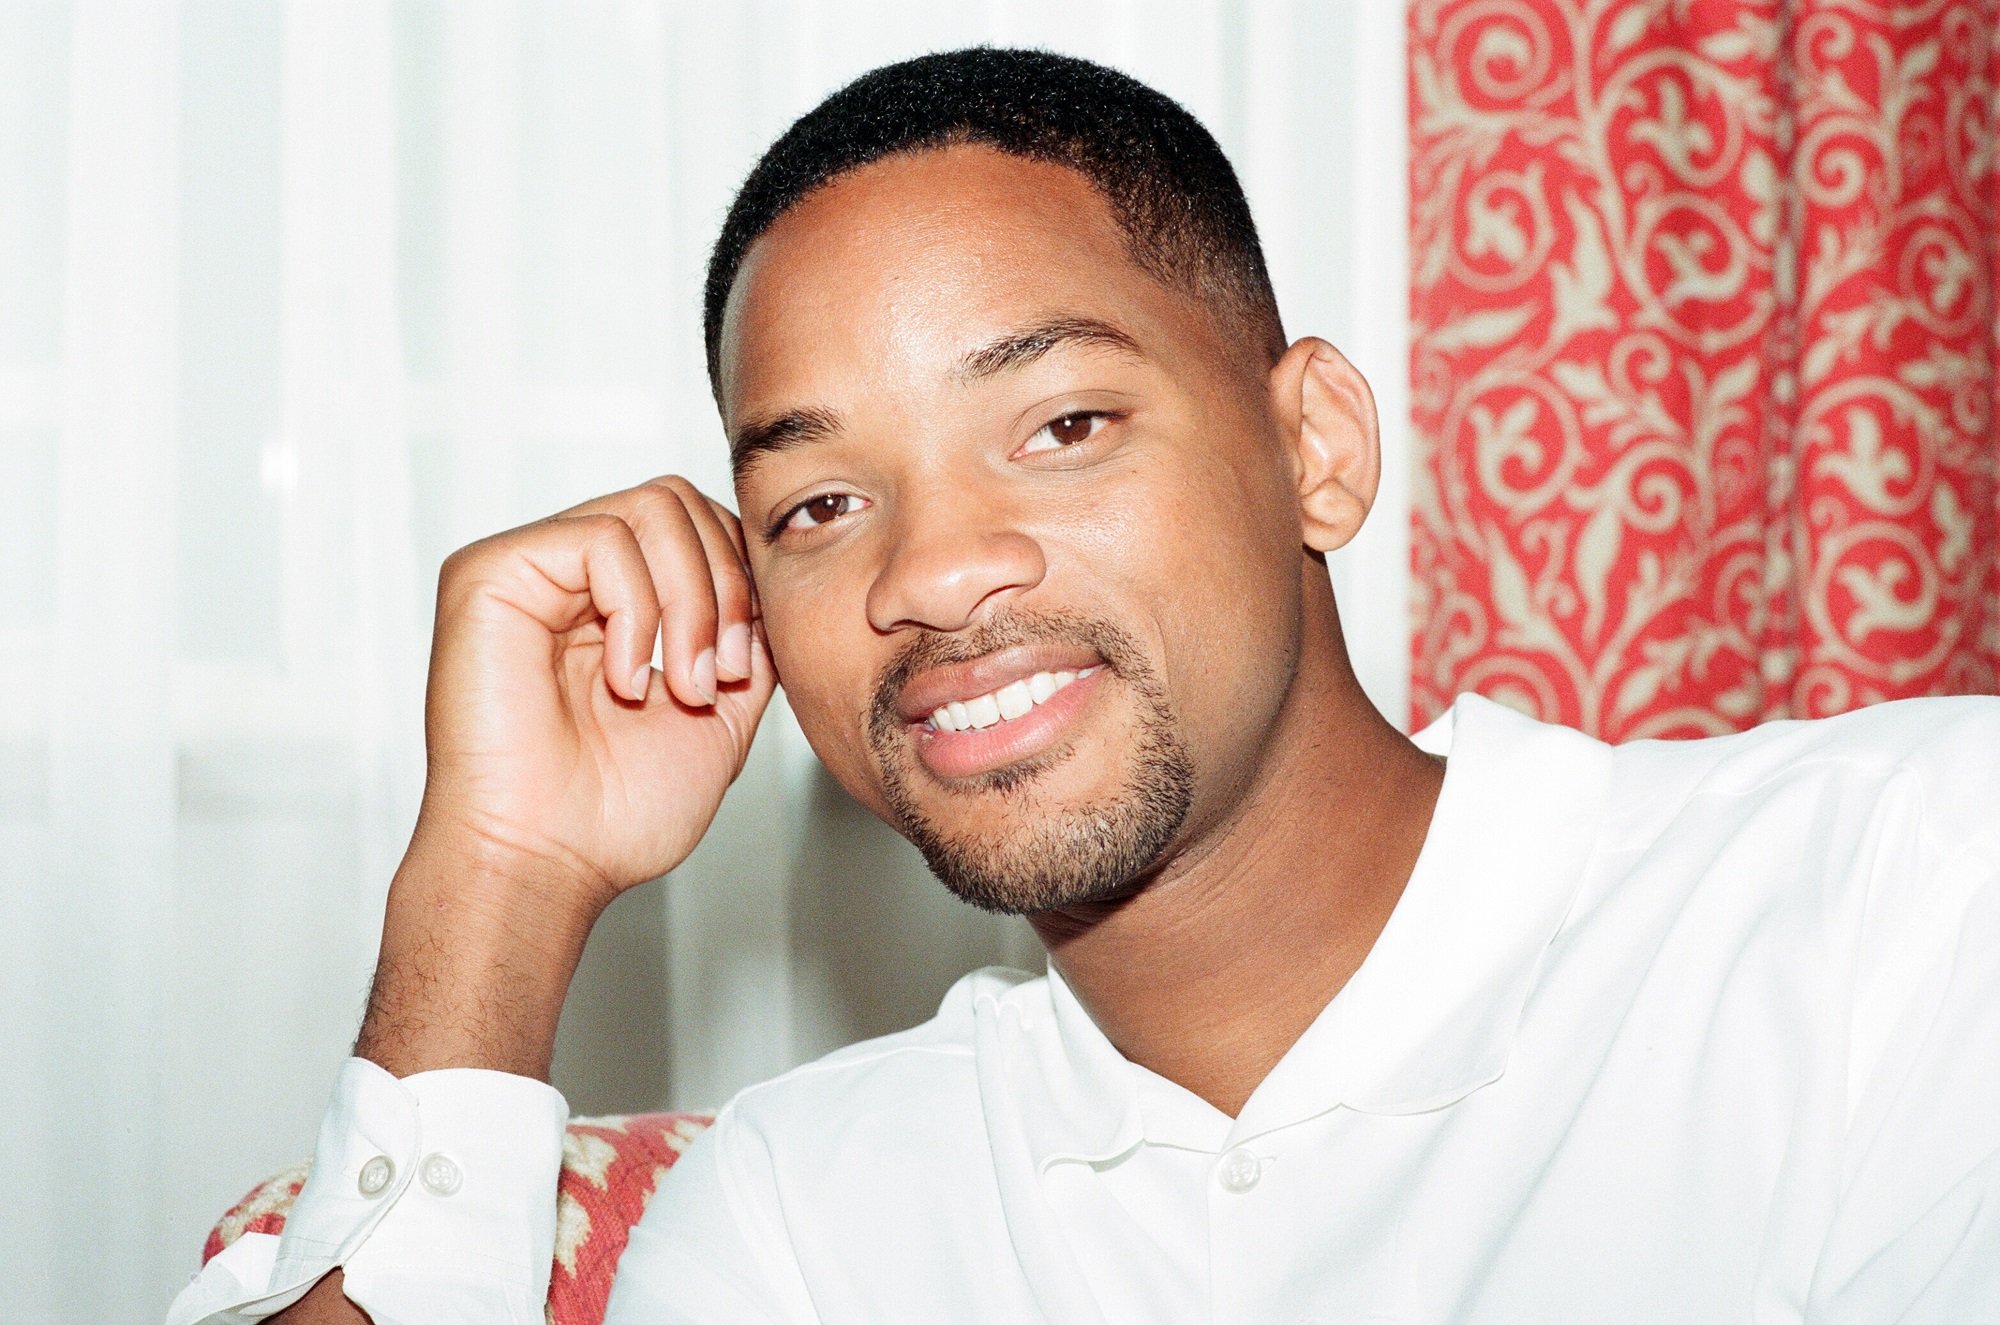 Will Smith with his fist on his cheek